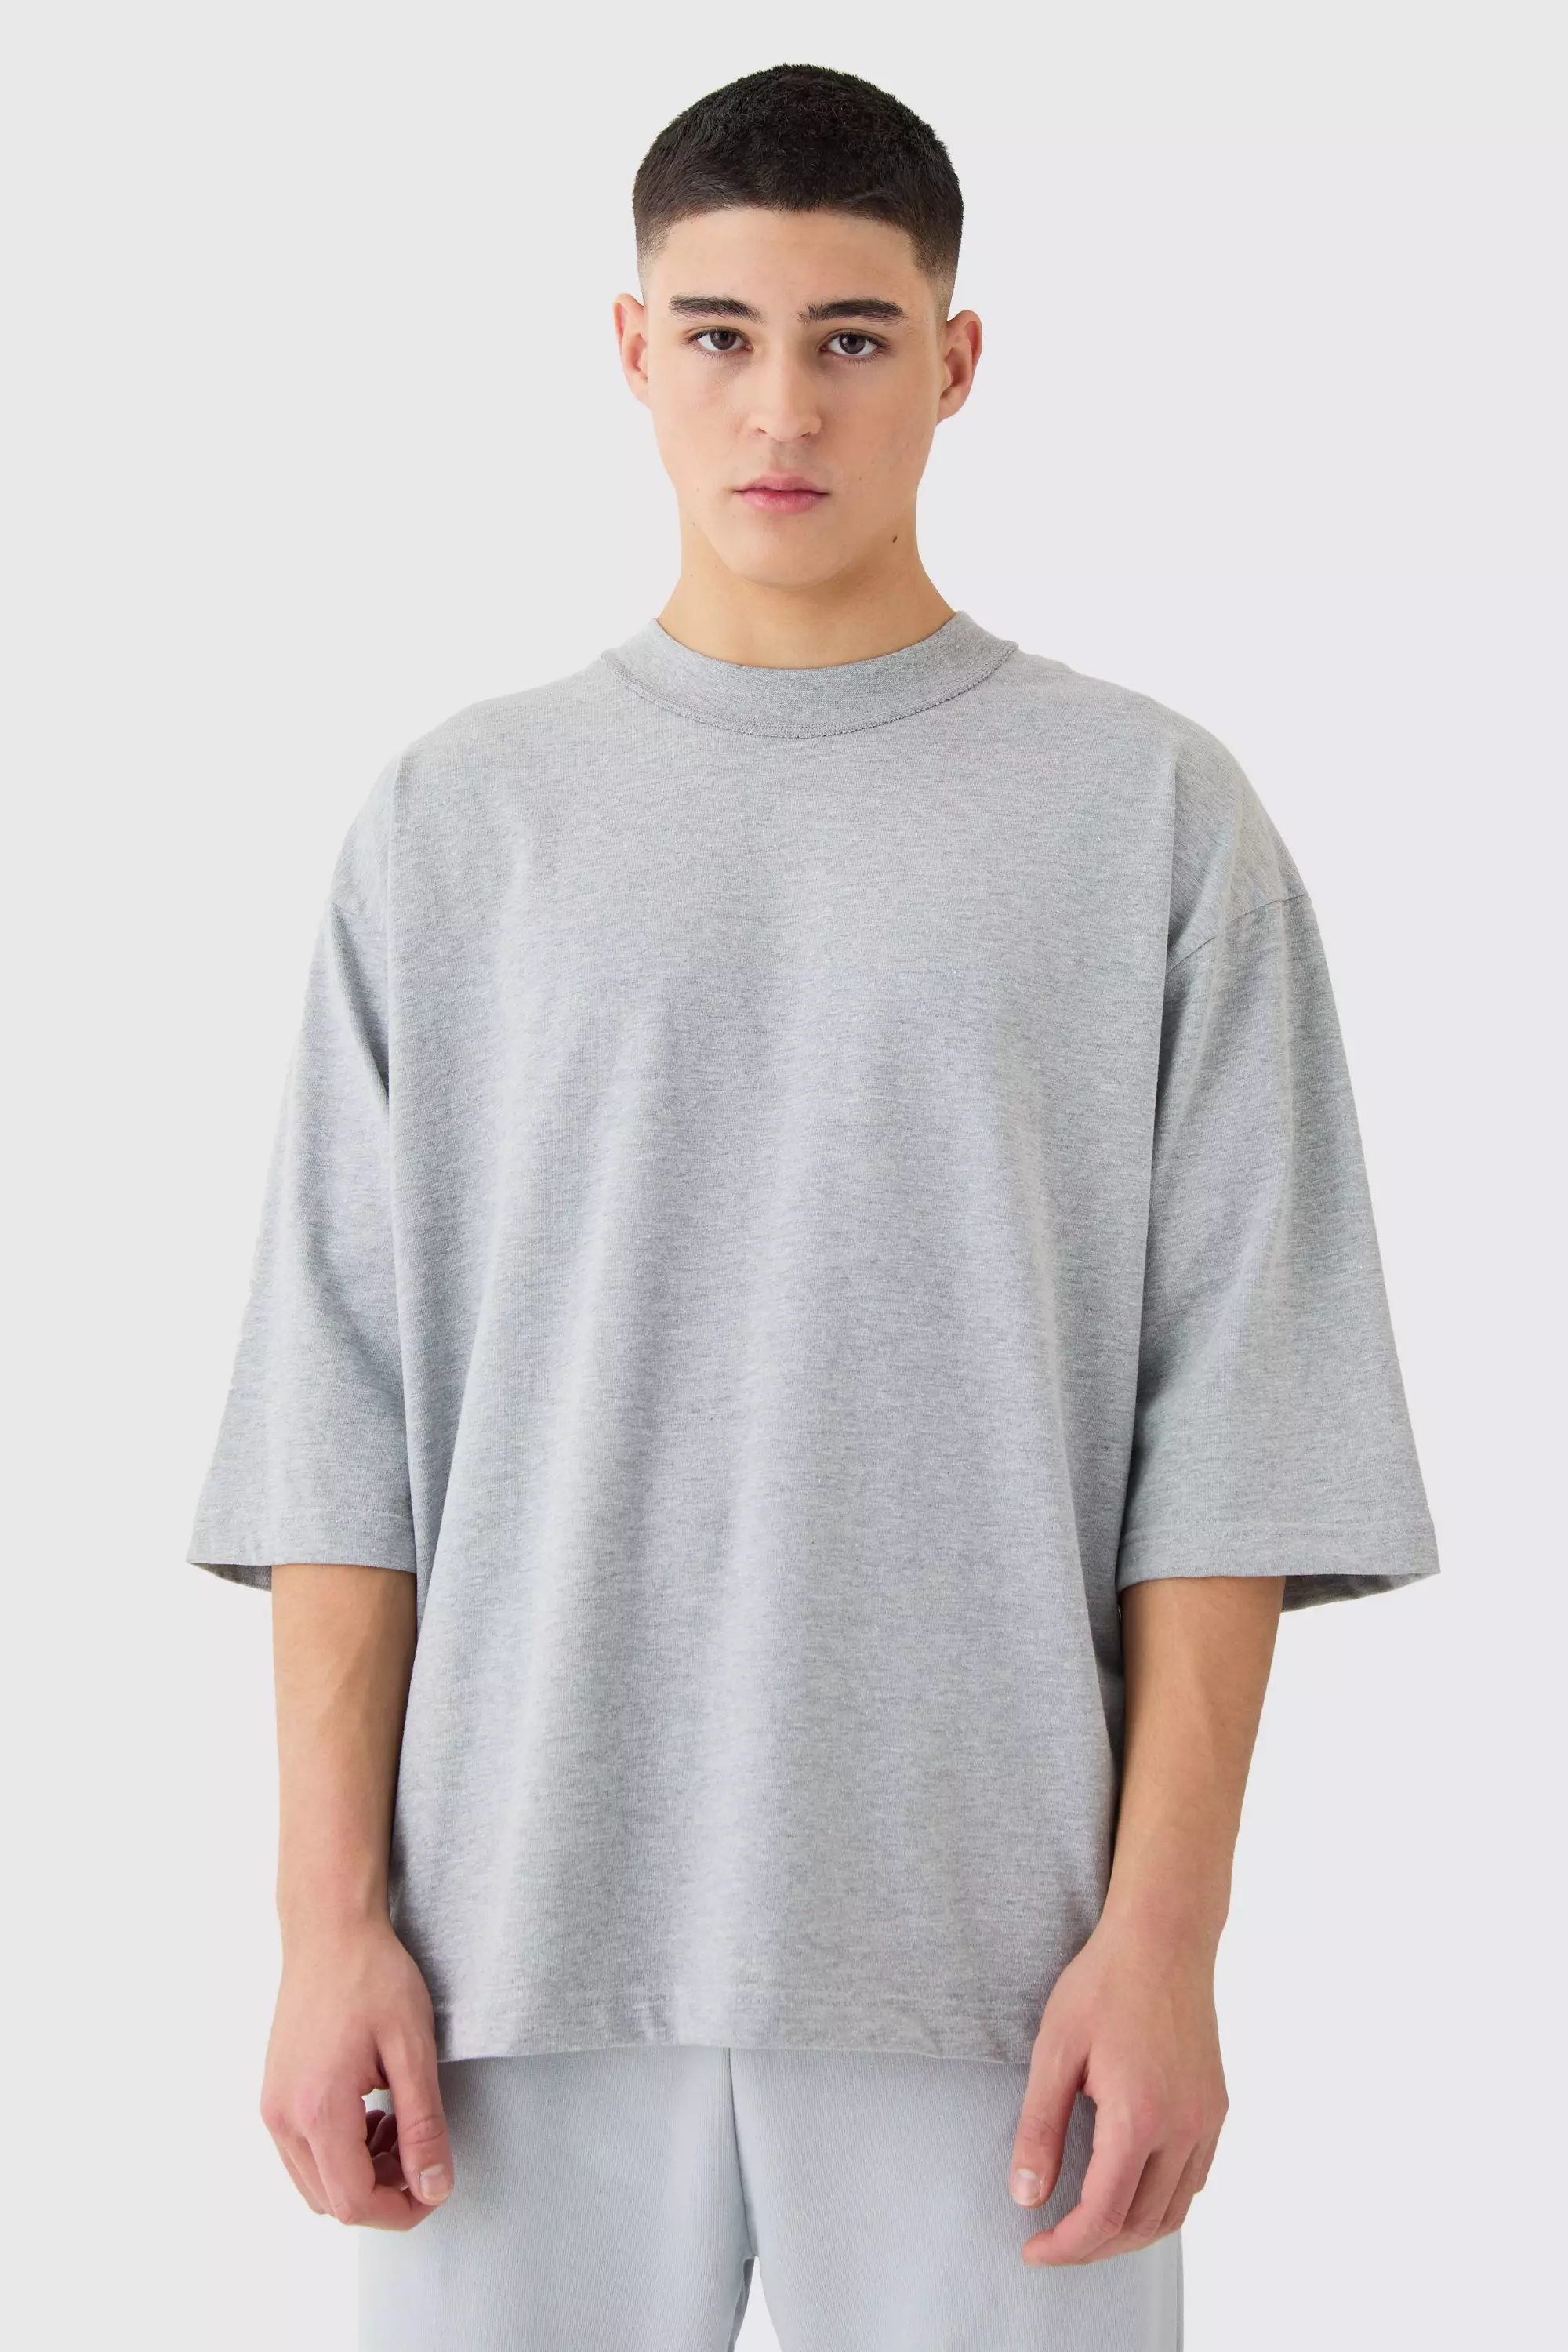 Oversized Heavy Layed On Neck Carded T-shirt Grey marl